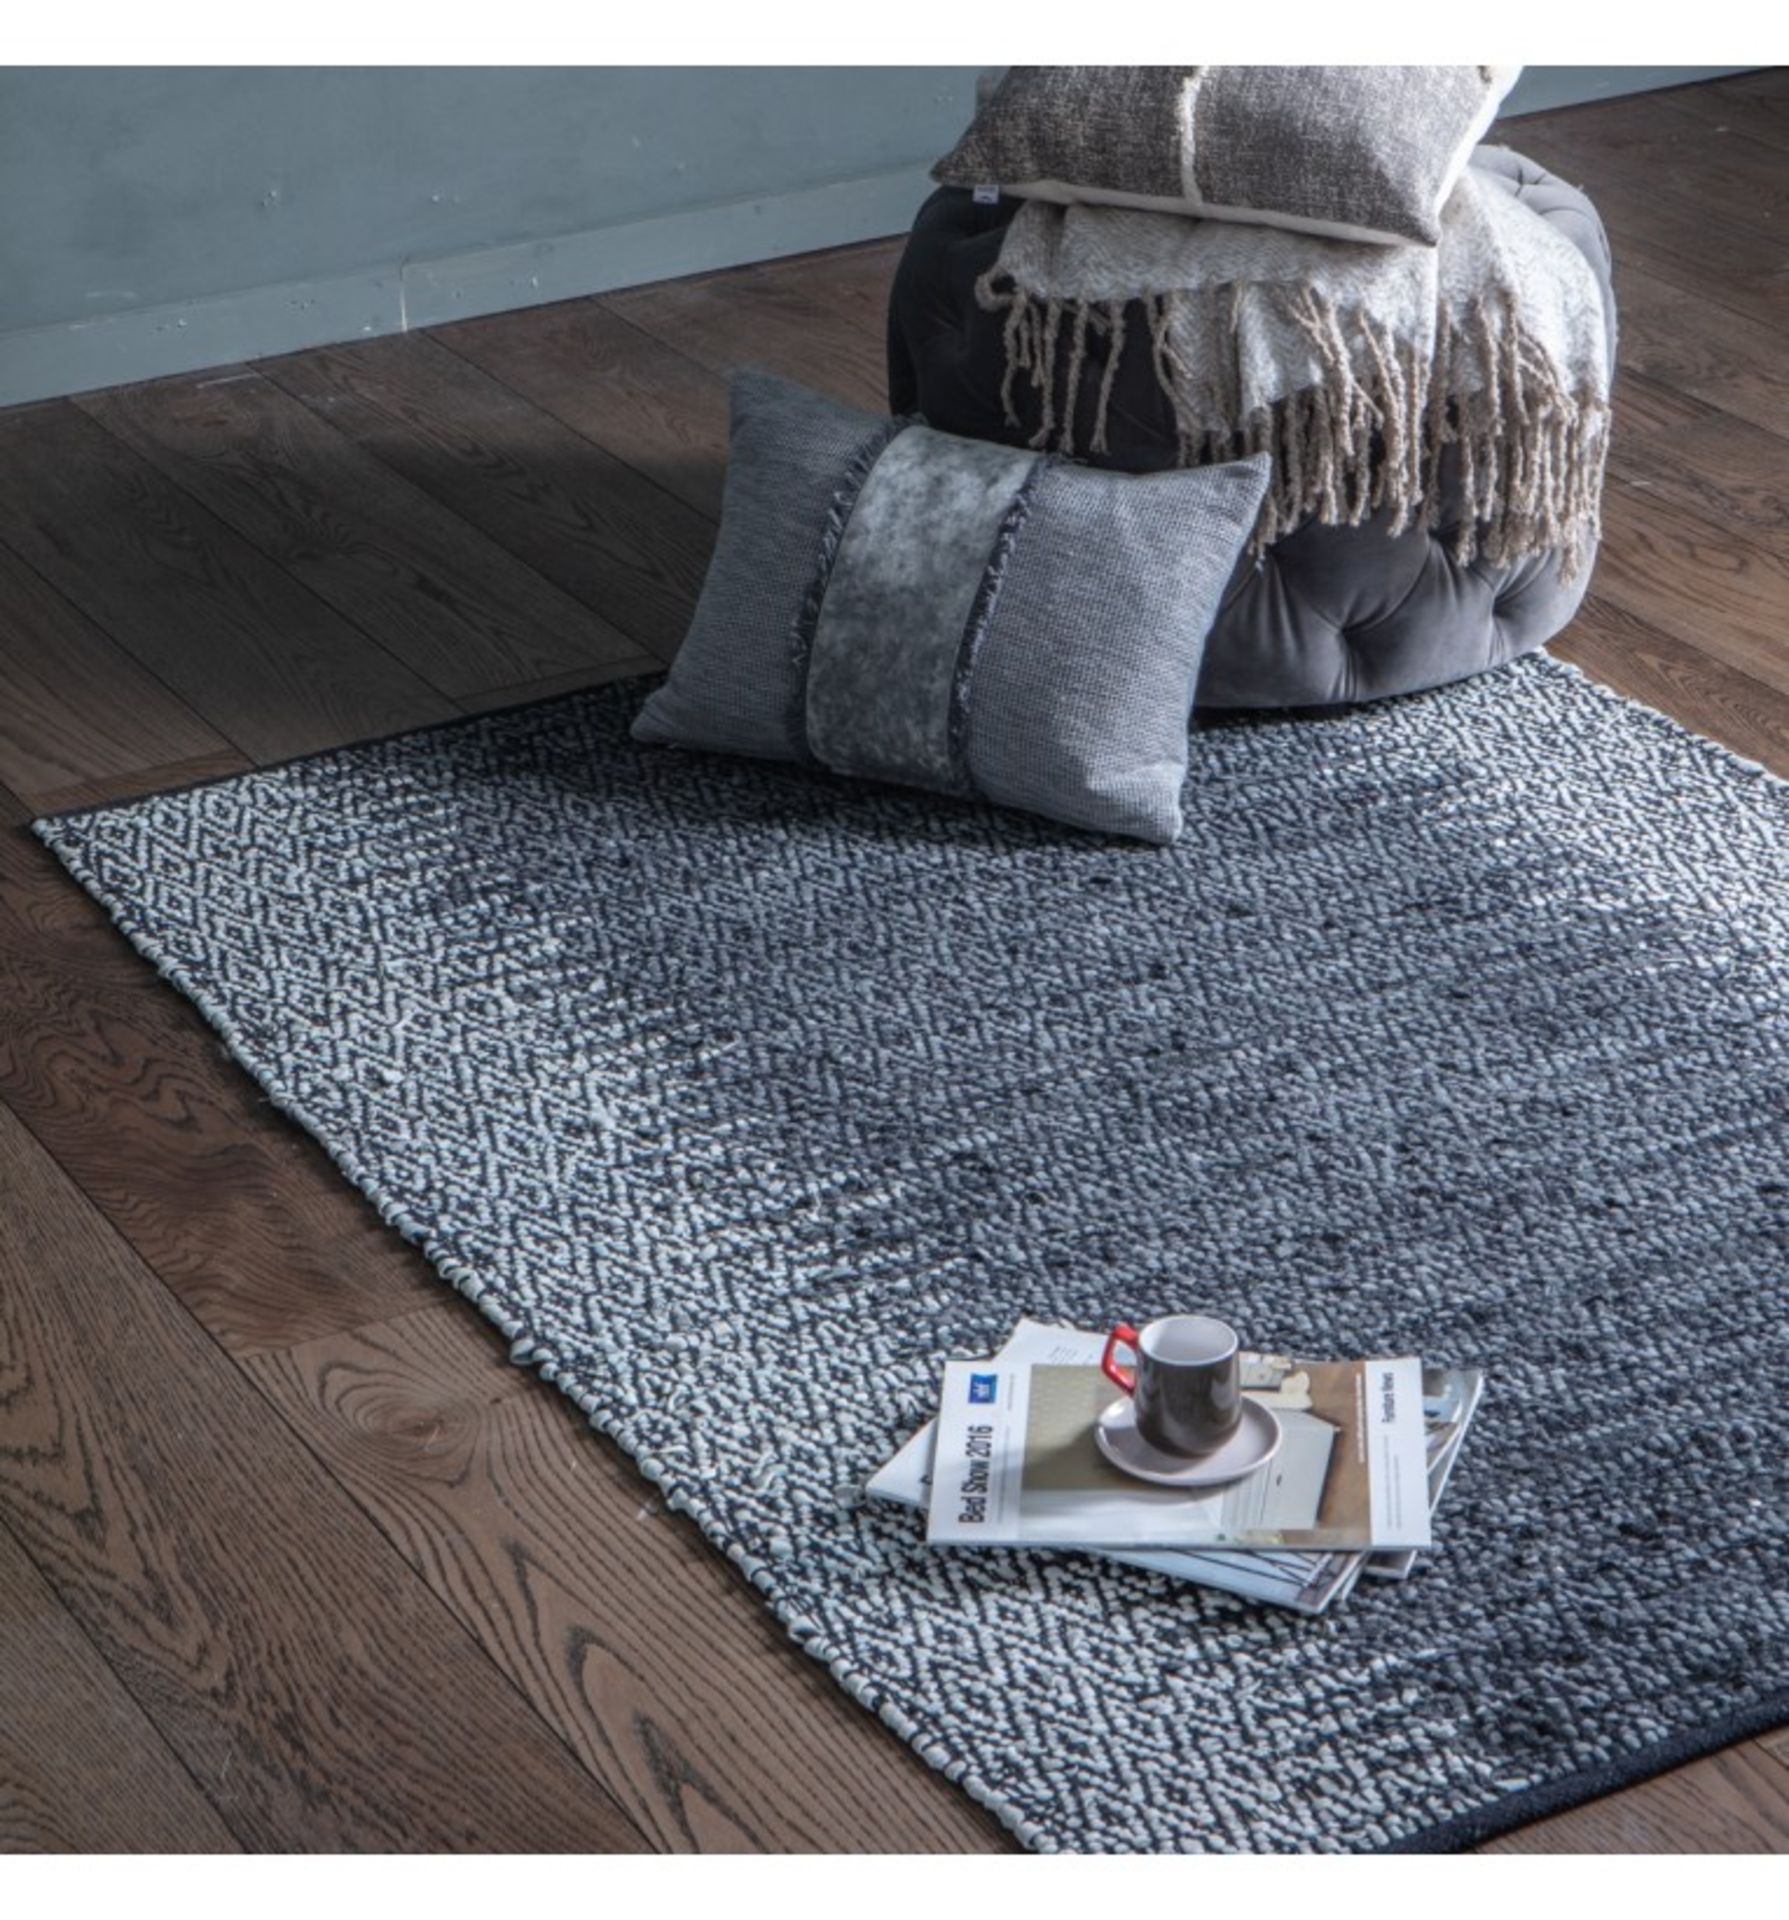 Garcia Leather Rug Grey An Eye-Catching Woven Leather Diamond Rug Design With A Bold Monochrome